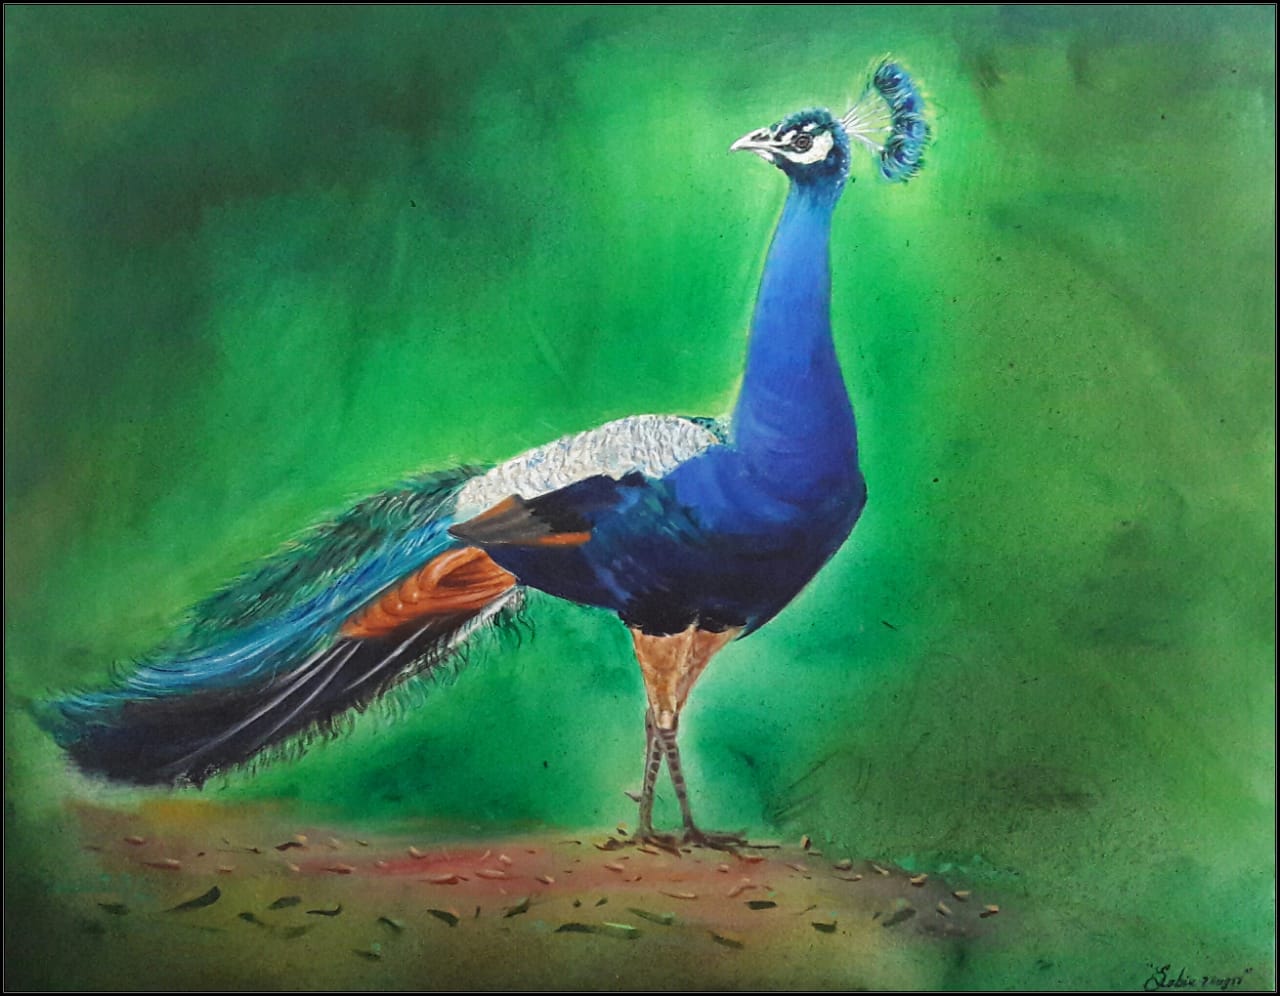 peacock painting nft - @ Annu_Nft the multi colection | OpenSea